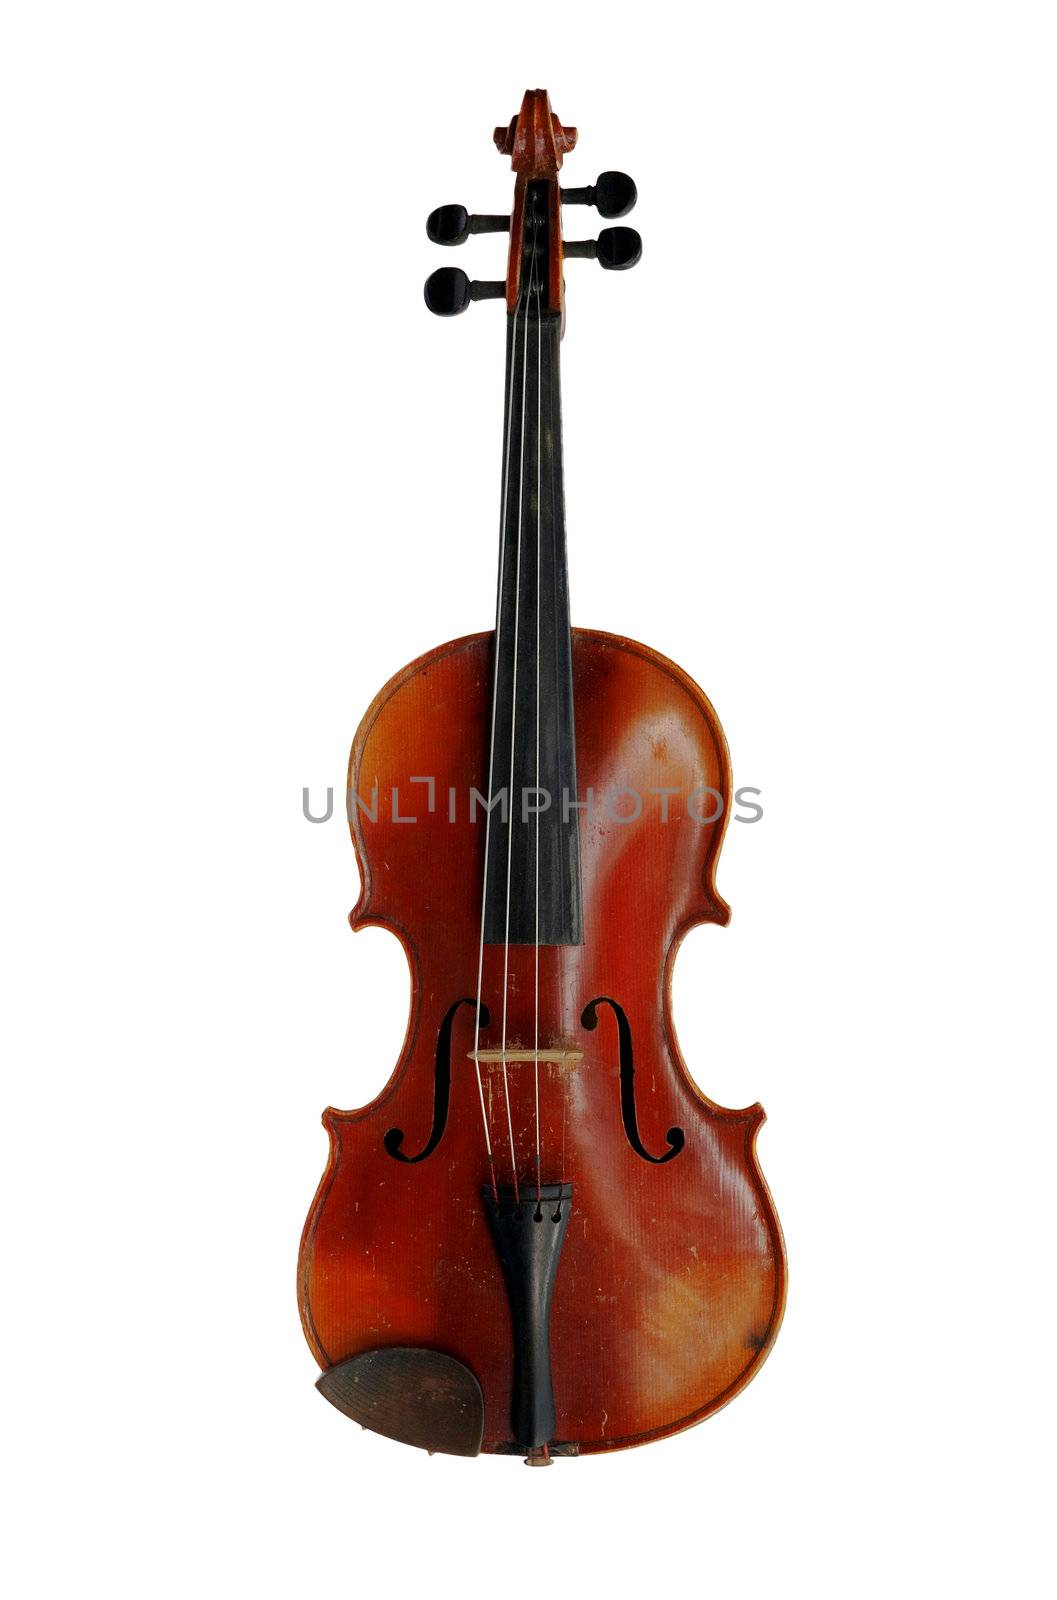 Old violin on white background